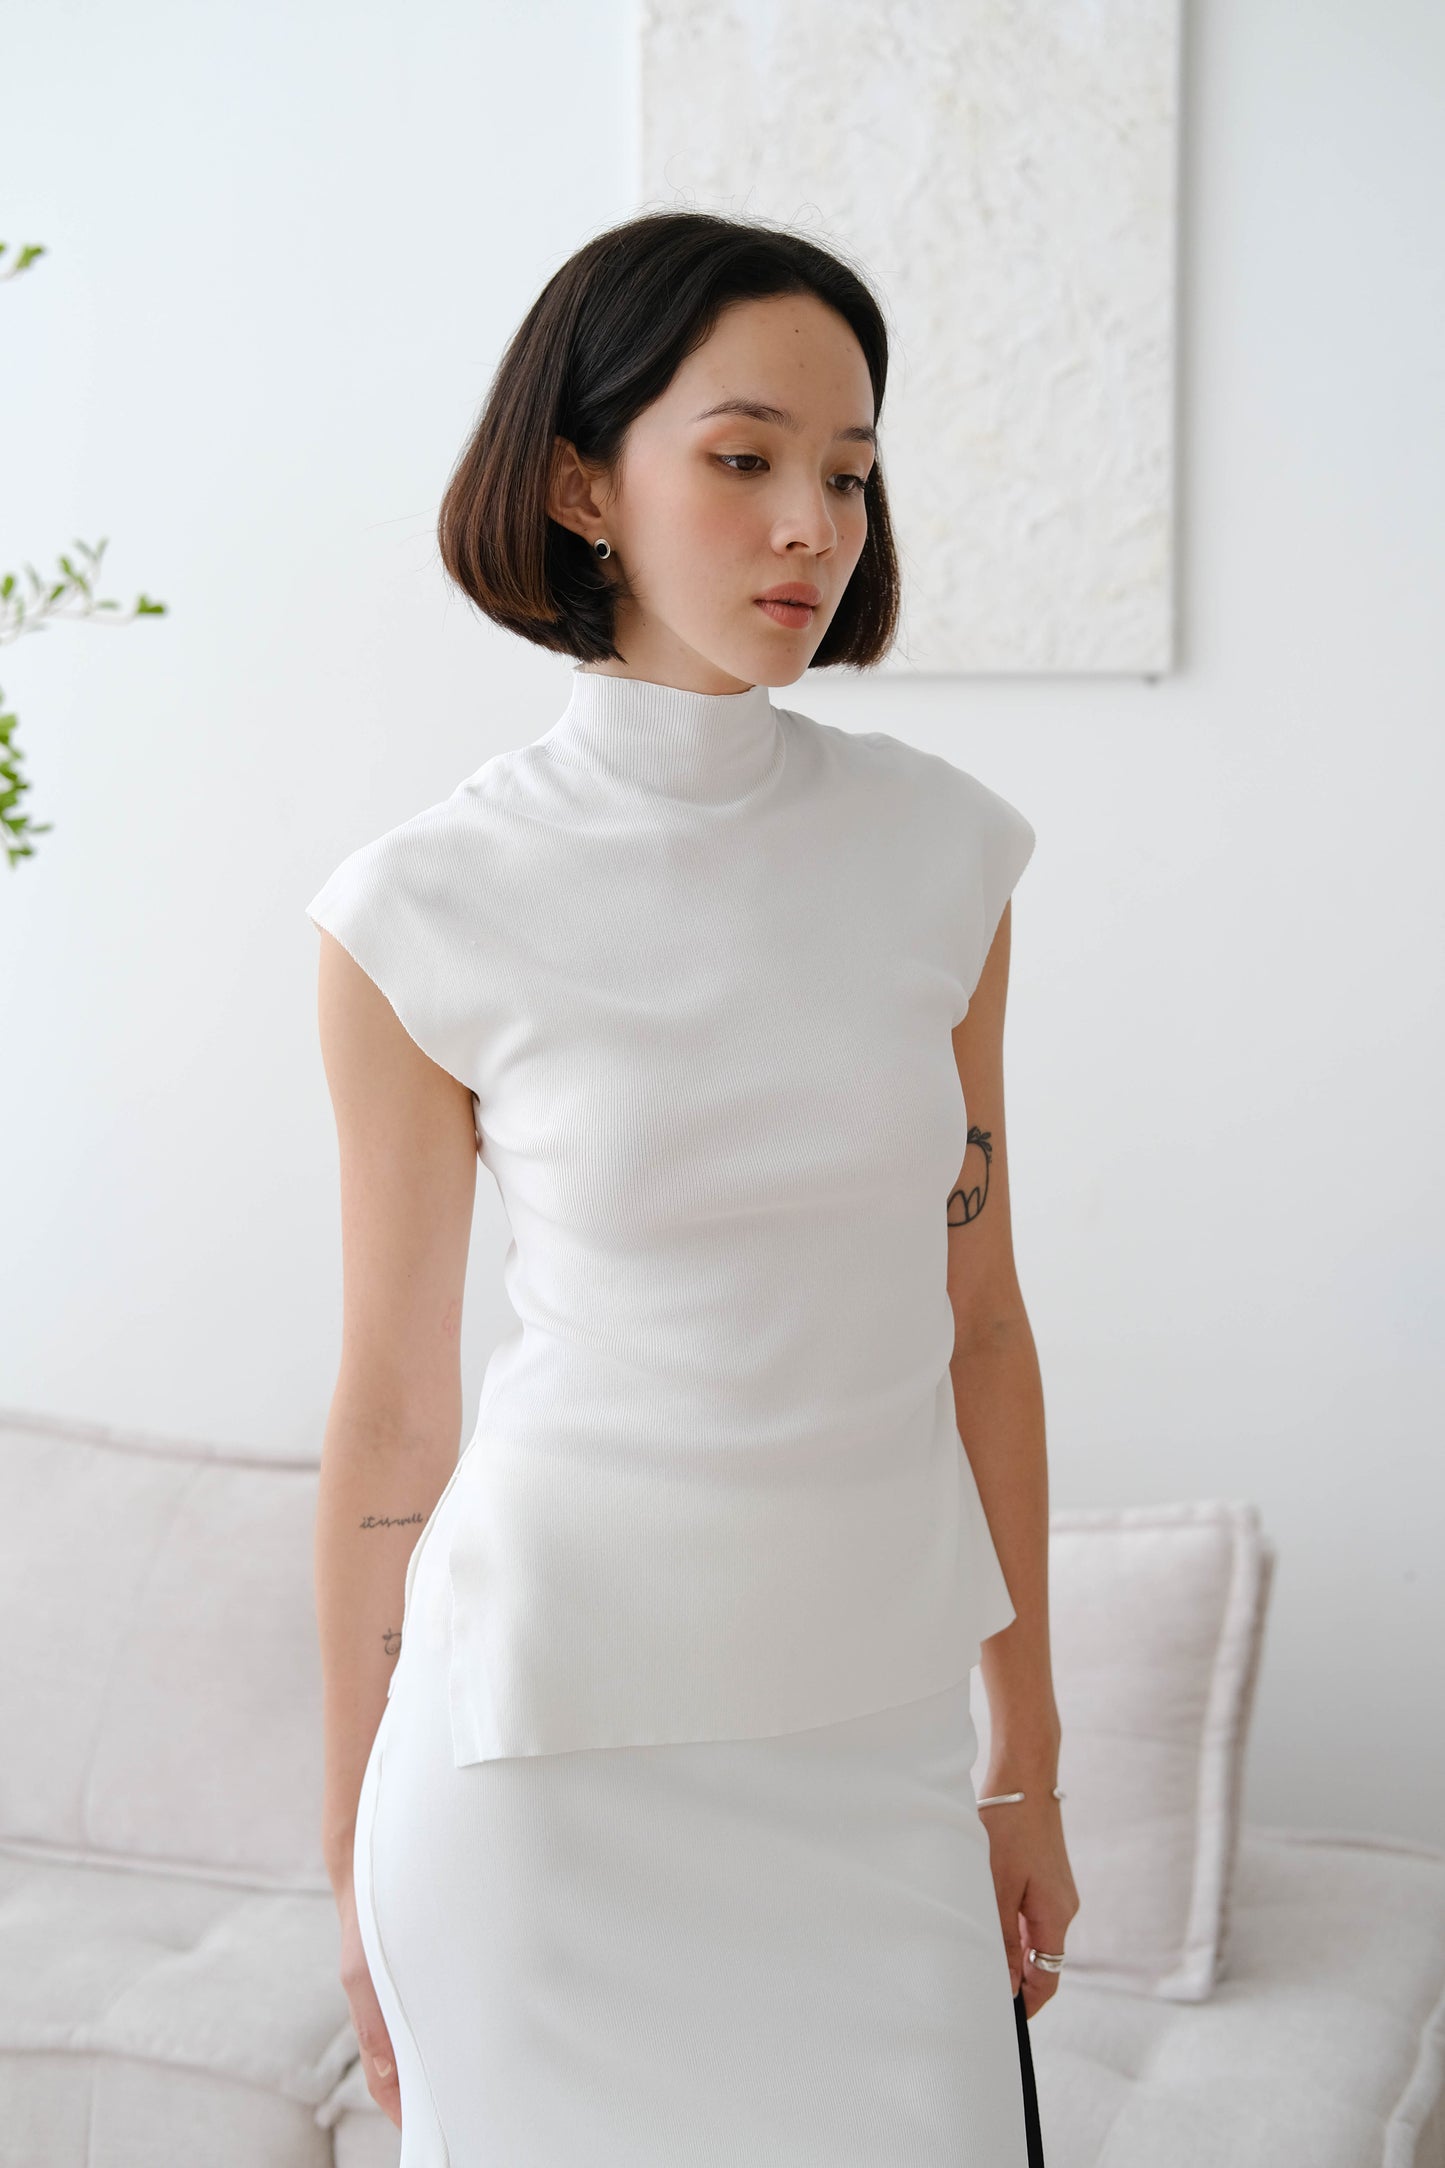 Stand collar top with sleeves in snow white color